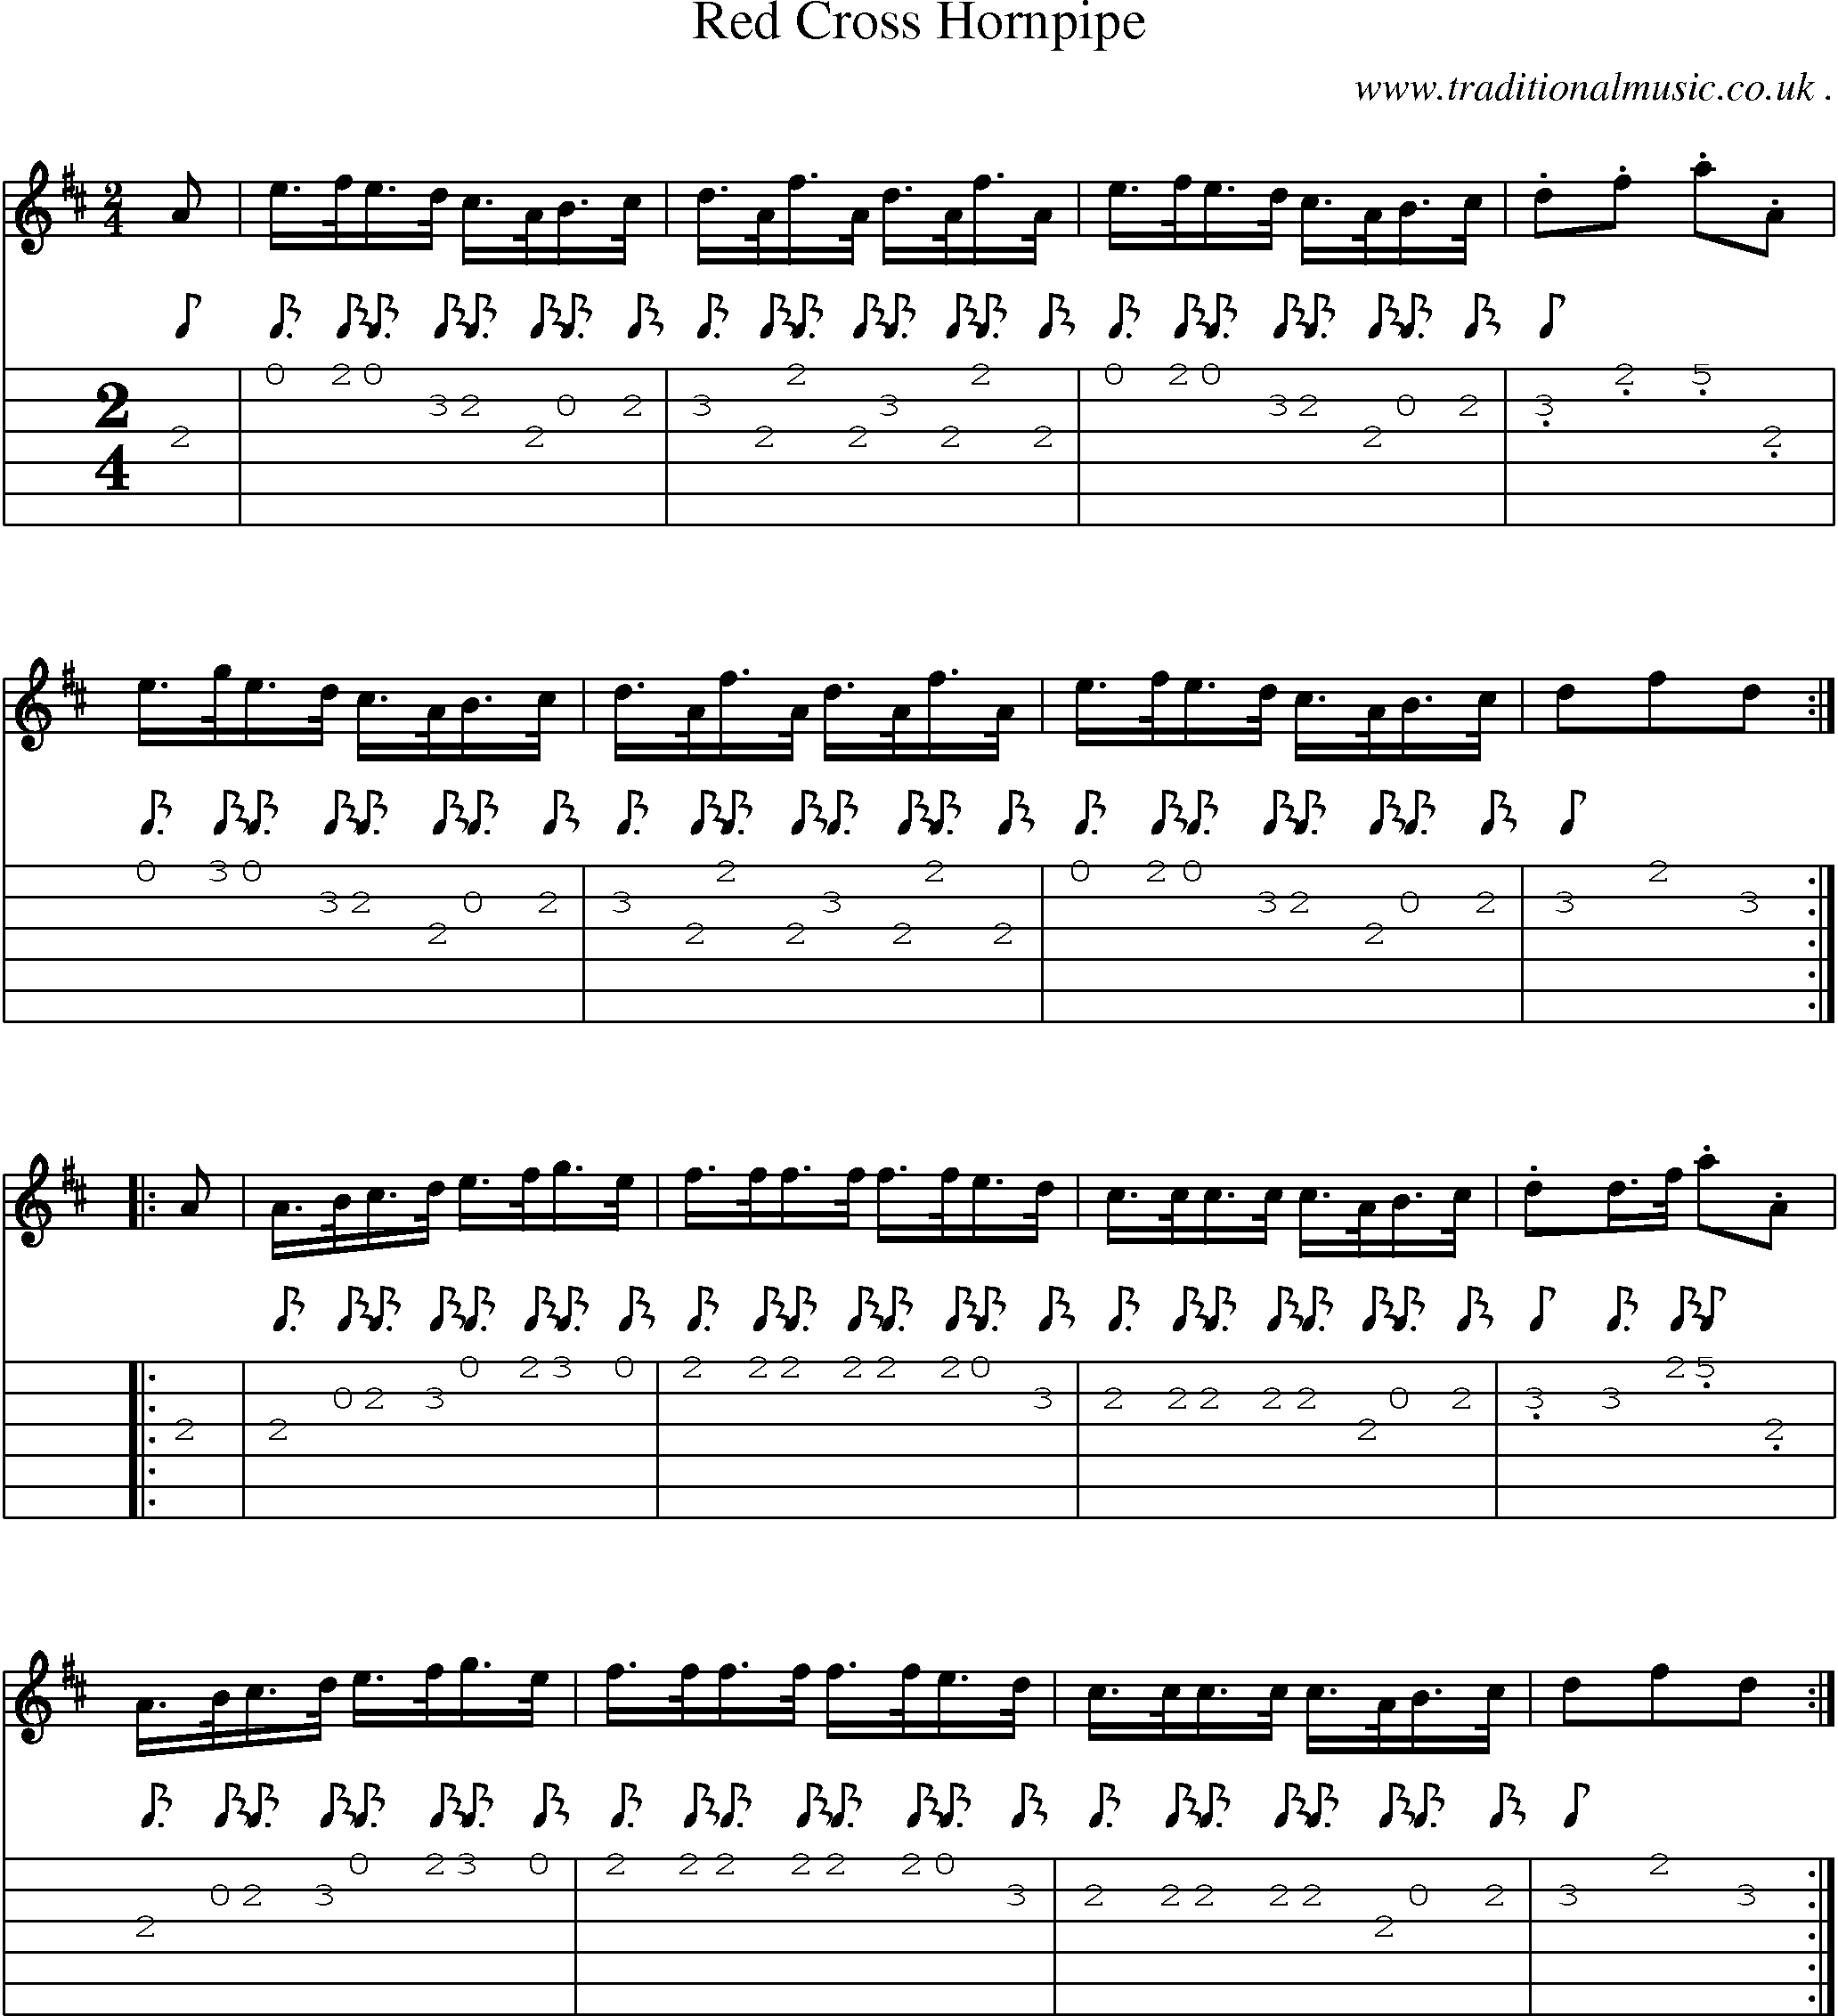 Sheet-Music and Guitar Tabs for Red Cross Hornpipe